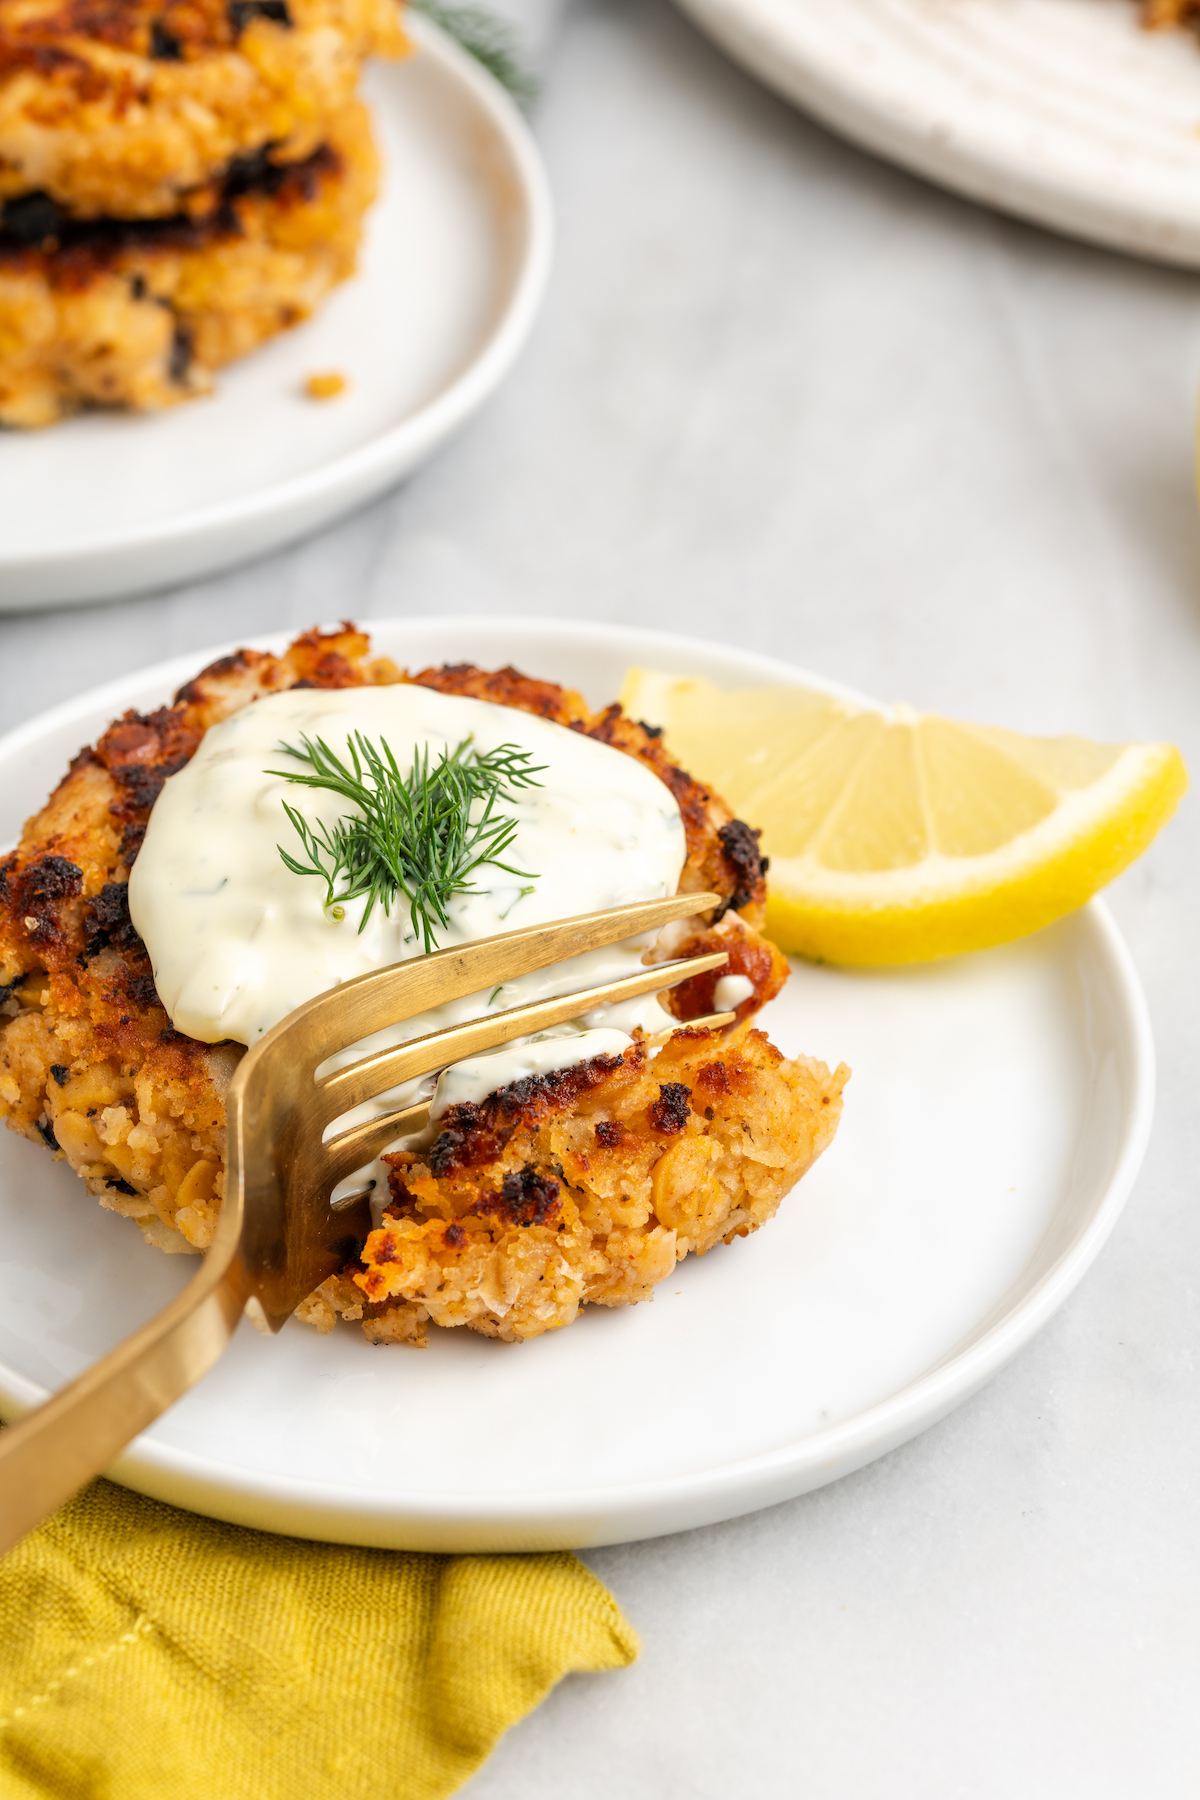 Vegan crab cake on plate with fork cutting into it